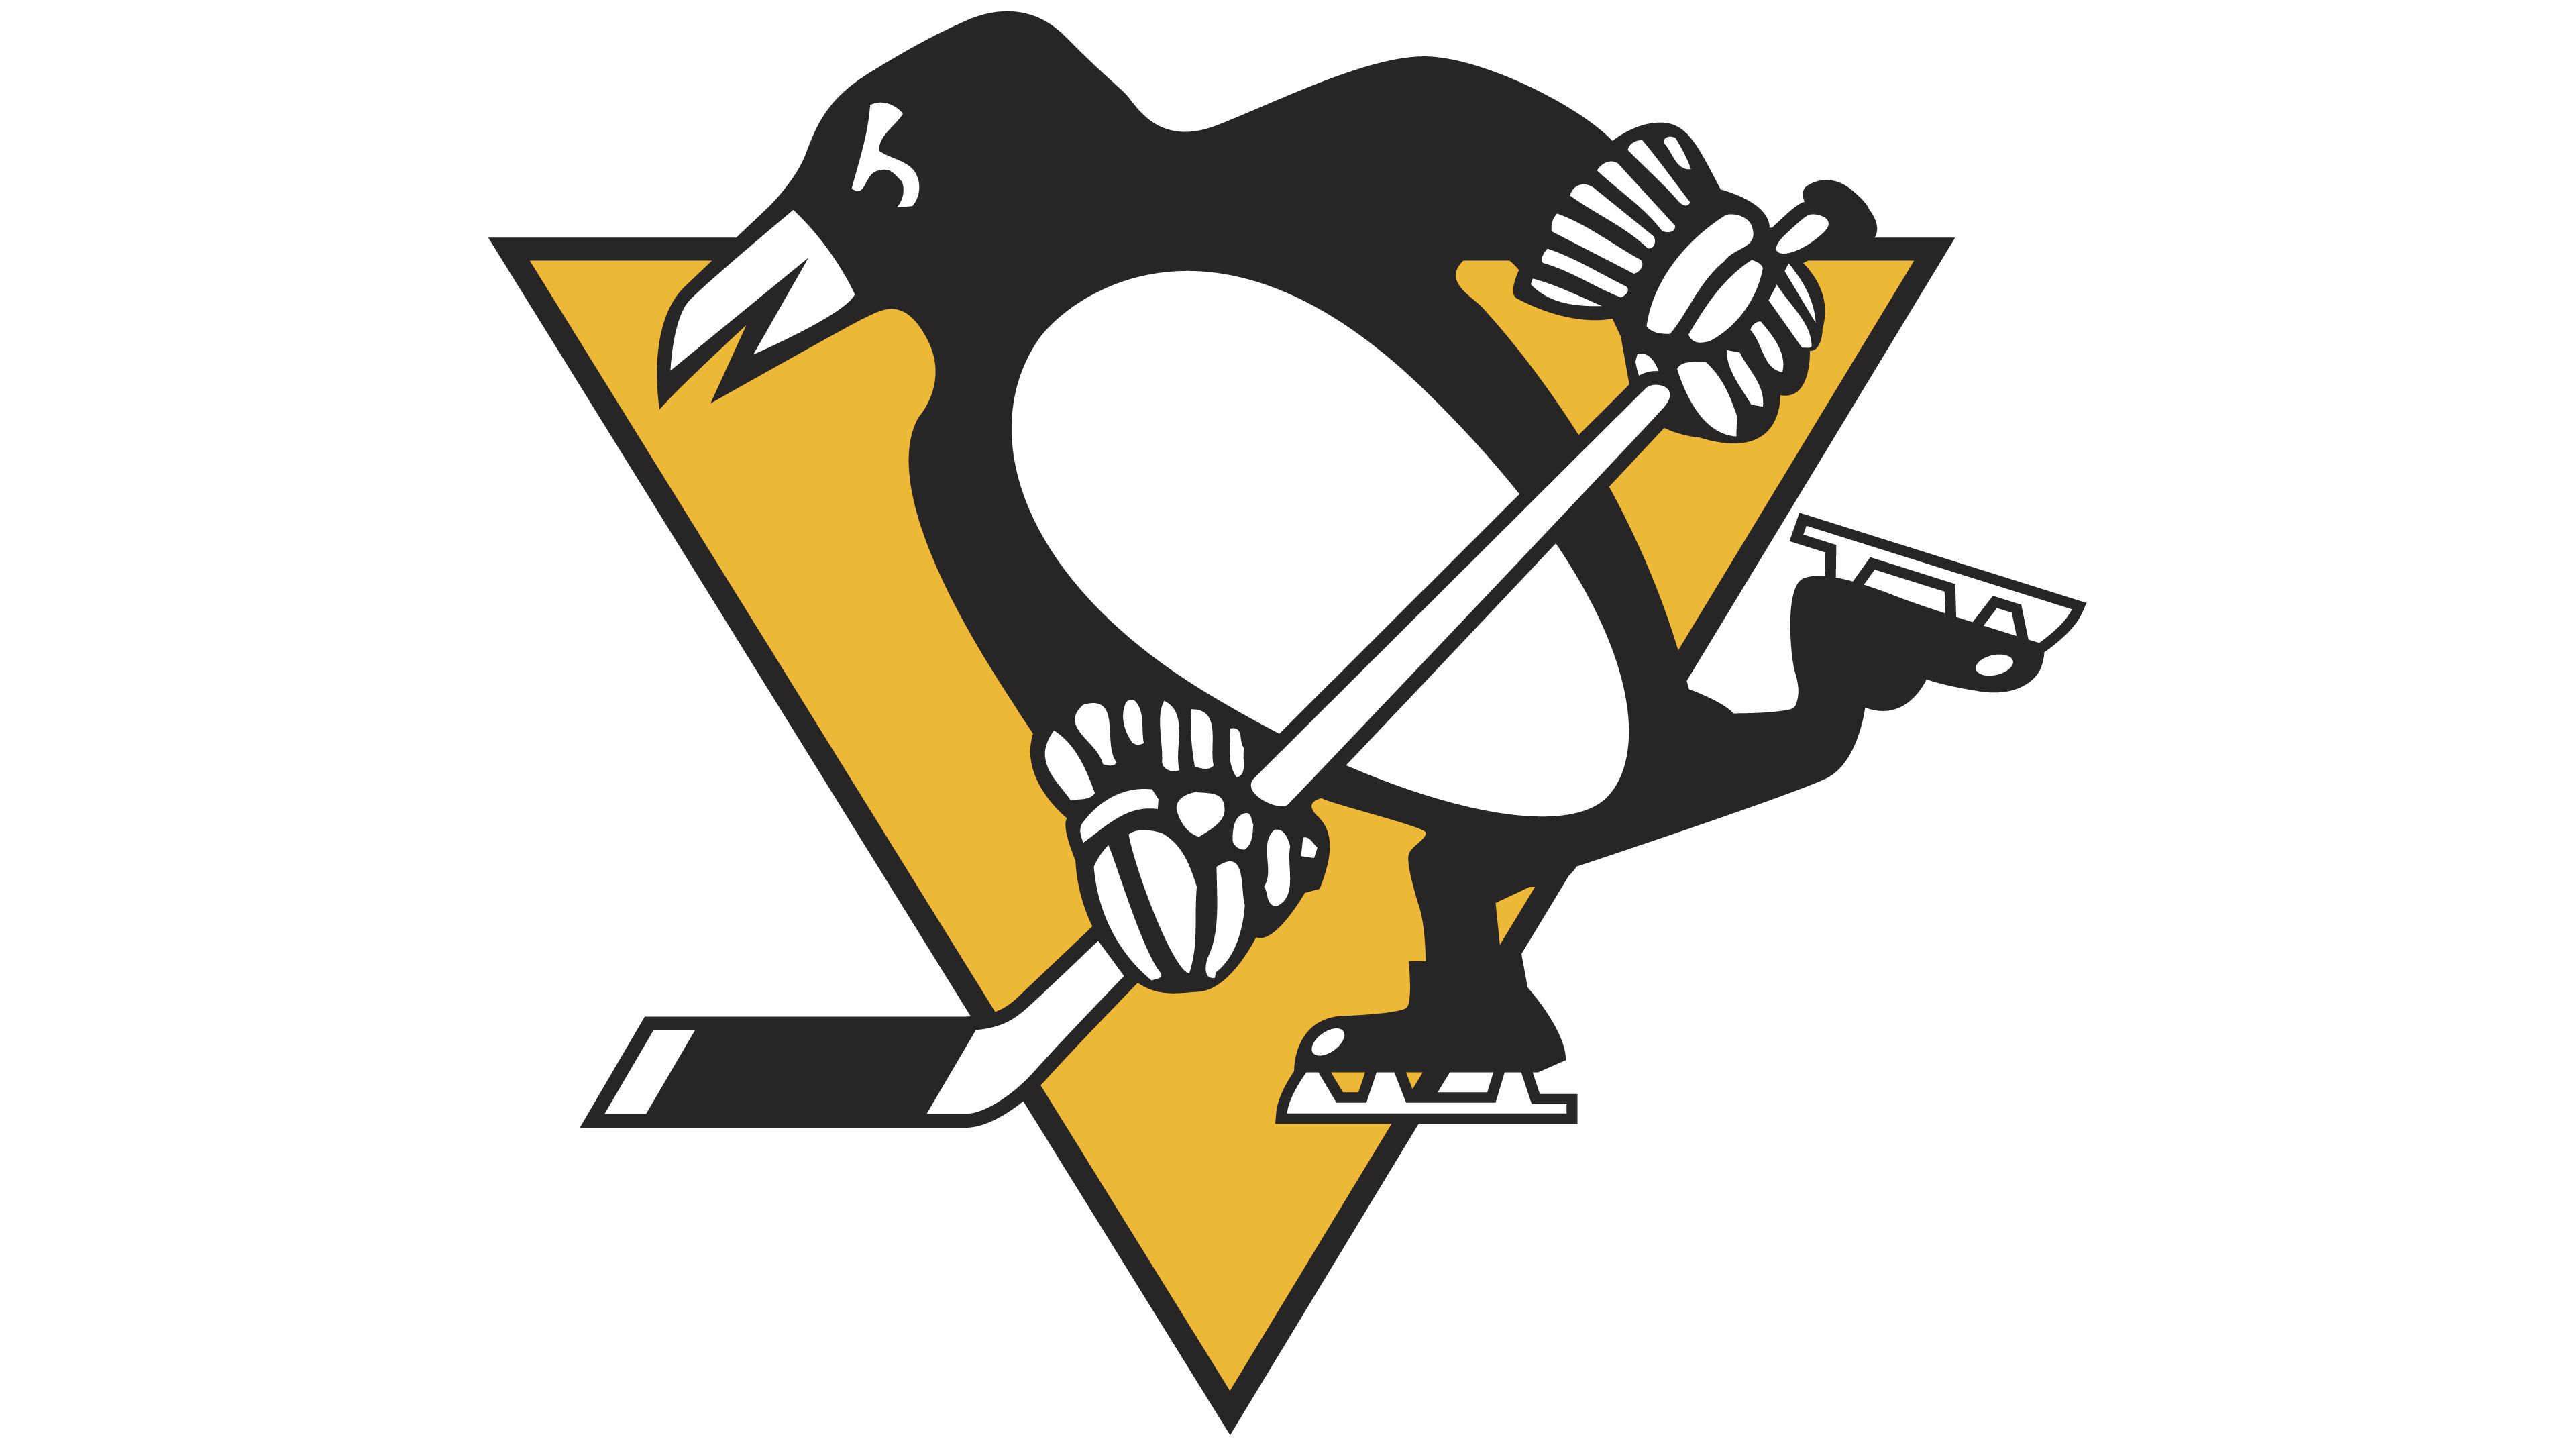 Penguin Logo - Pittsburgh Penguins logo - Interesting History of the Team Name and ...